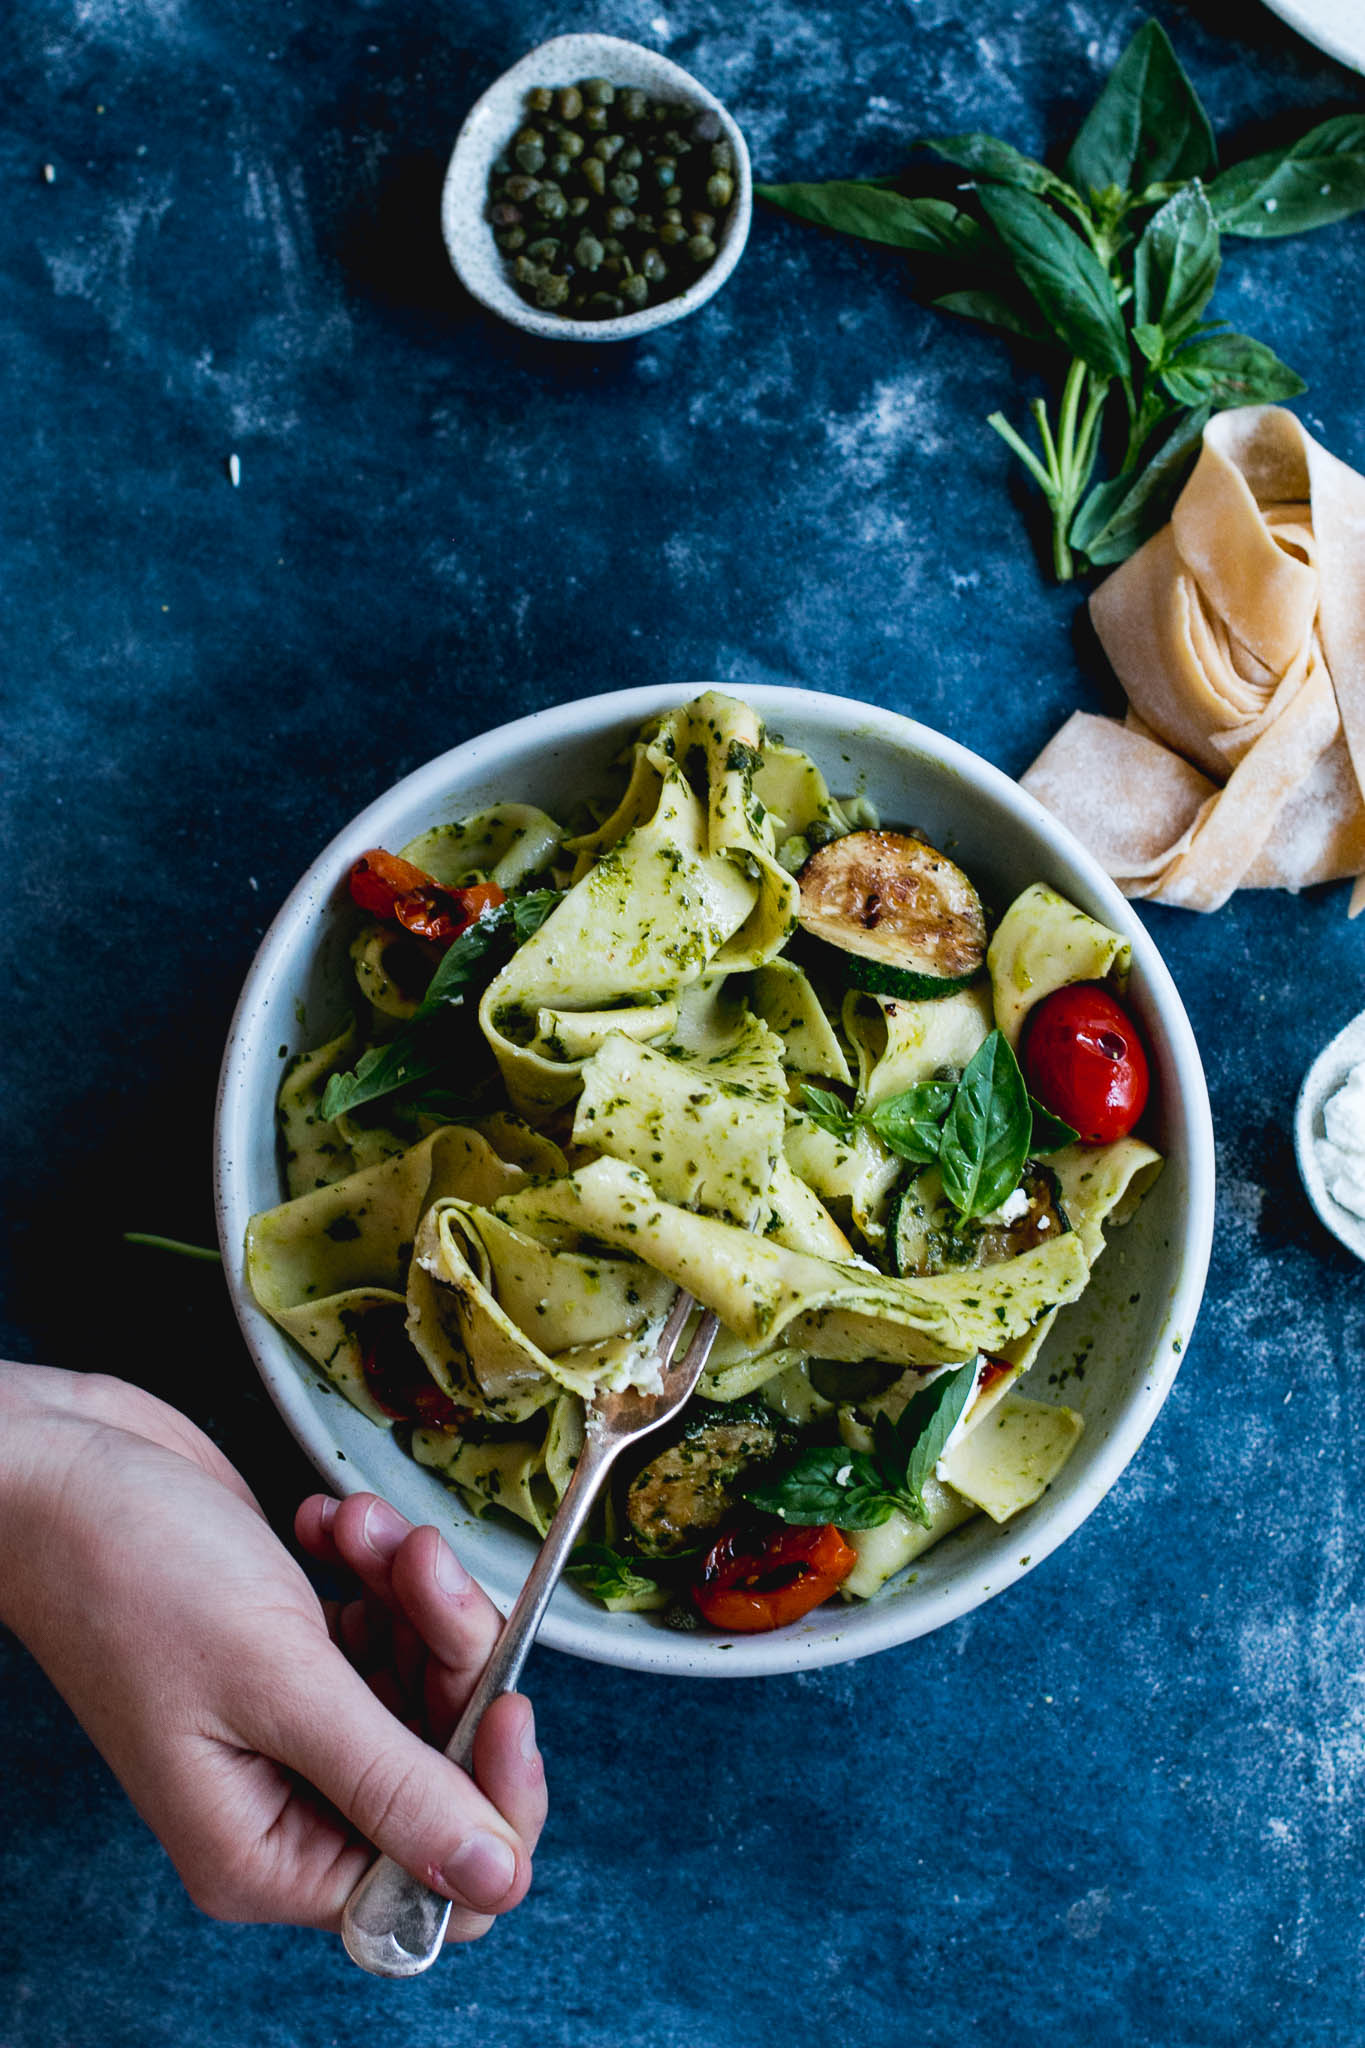 Homemade Pappardelle with Pesto, Zucchini & Goat’s Cheese - The Brick Kitchen